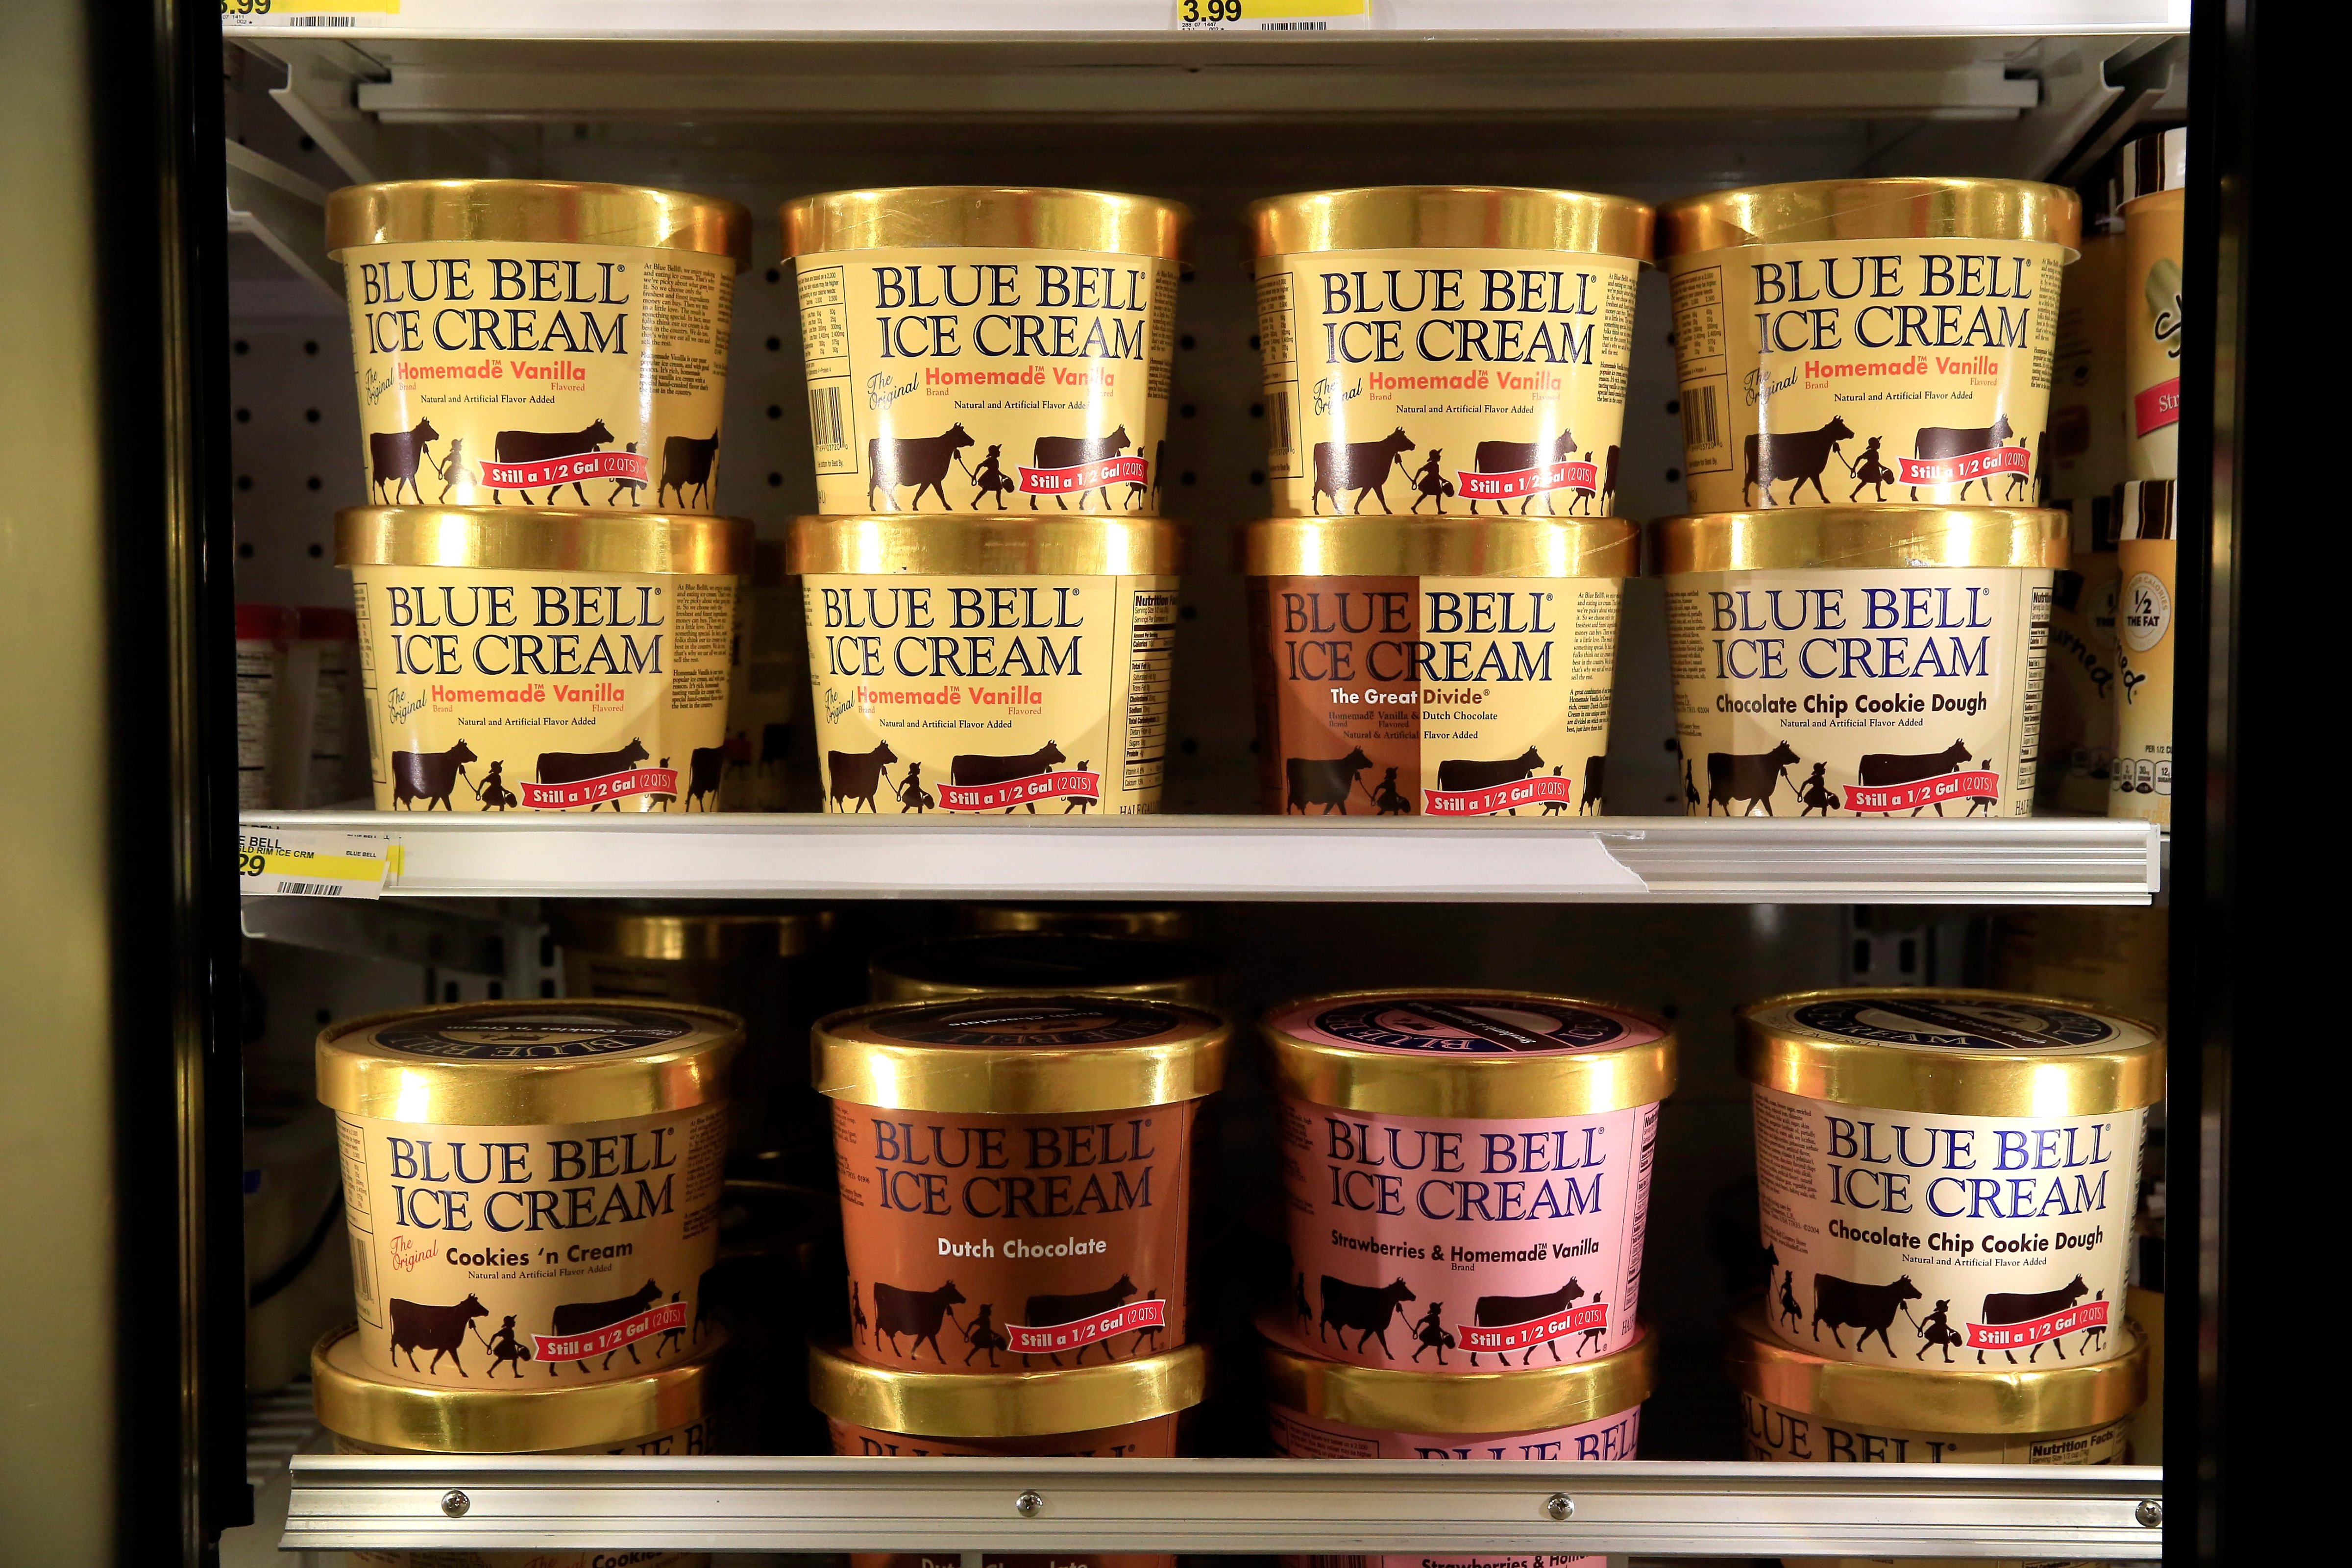 Blue Bell Ice Cream is seen on shelves of an Overland Park grocery store prior to being removed on April 21, 2015 in Overland Park, Kansas.